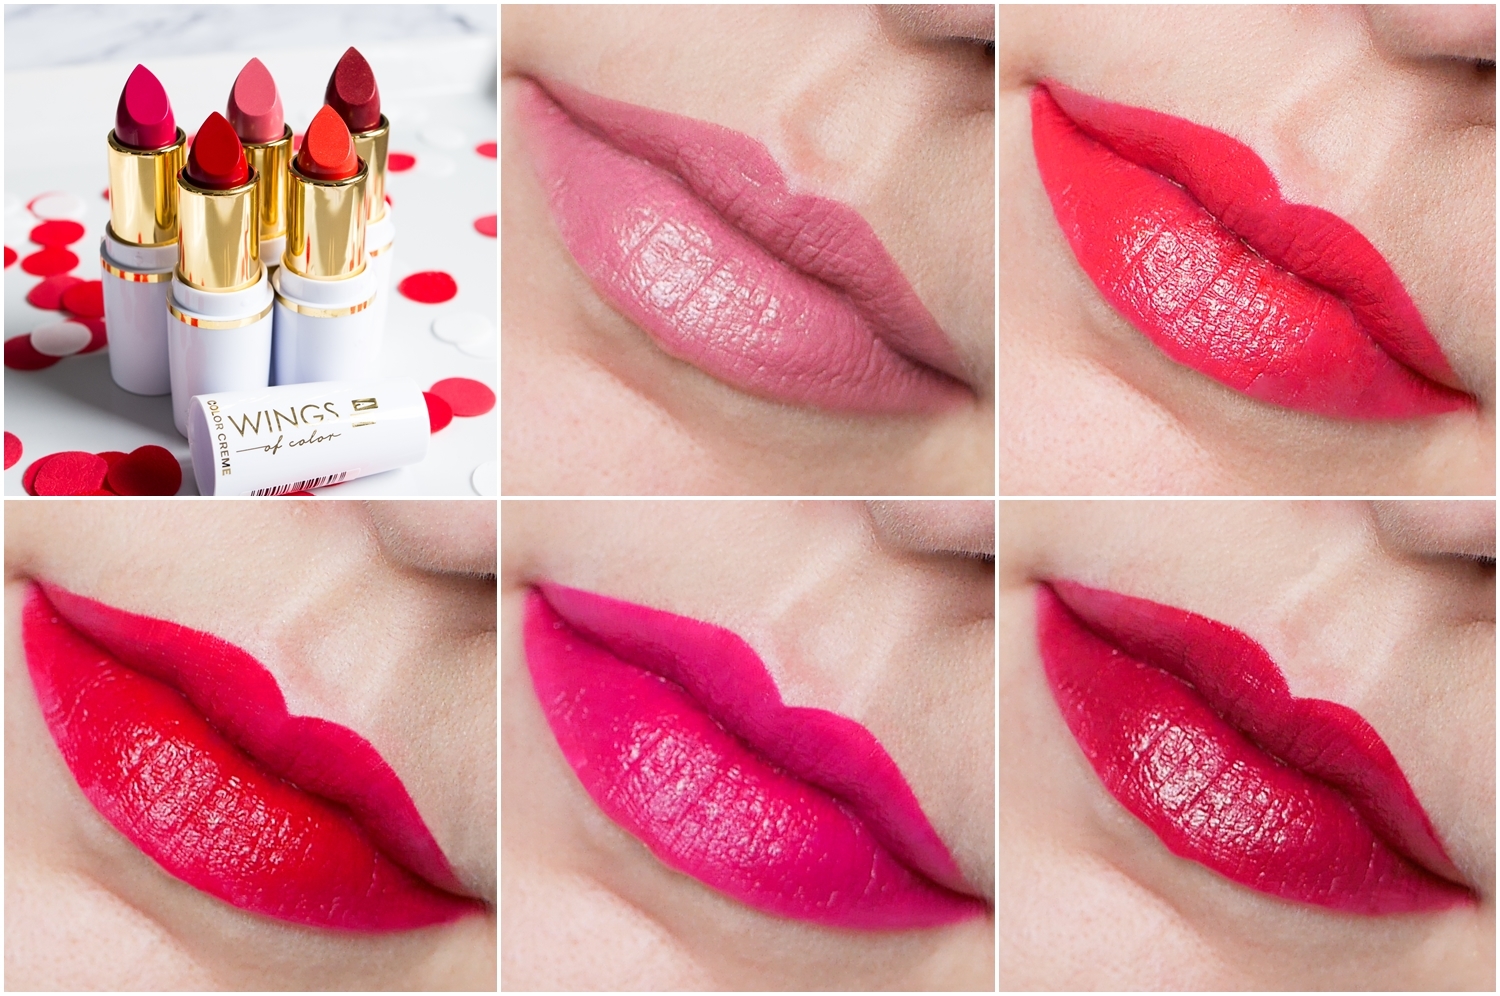 AA Wings of Colors Color Creme Lipstick 40 Cream Pink, 47 Orange Red, 48 Red Wine swatch